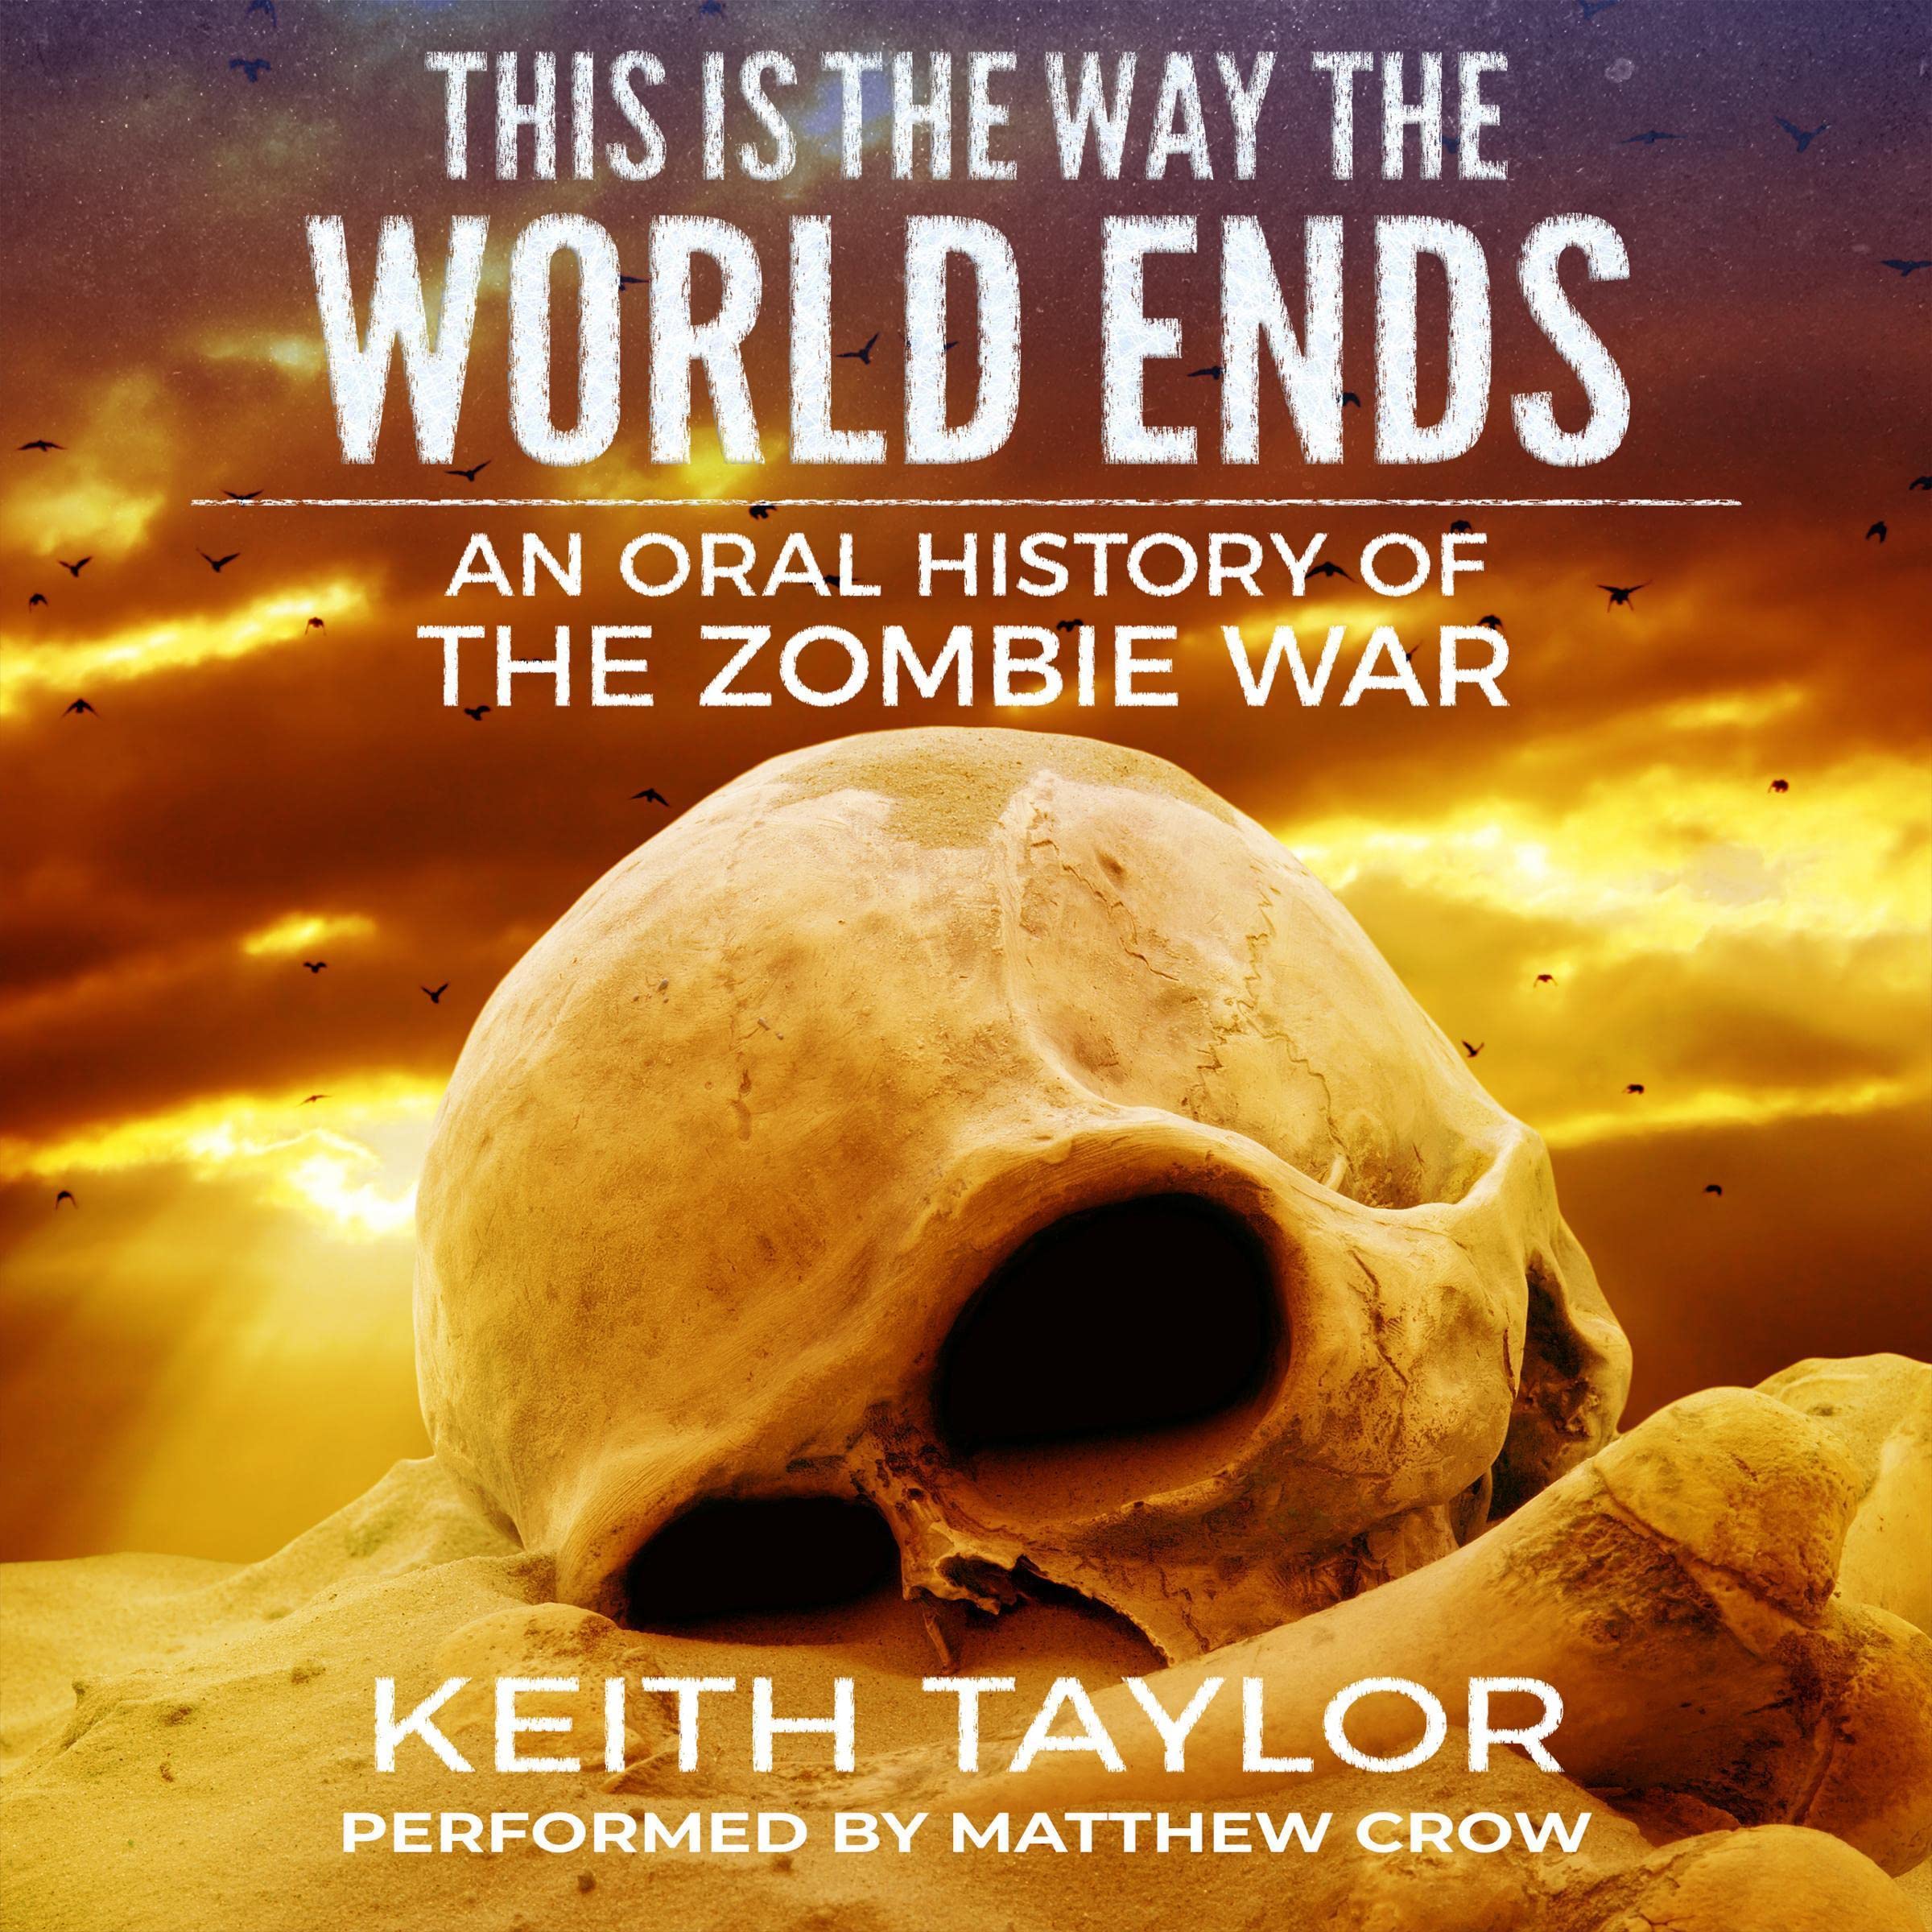 Audio Review: This is The Way the World Ends